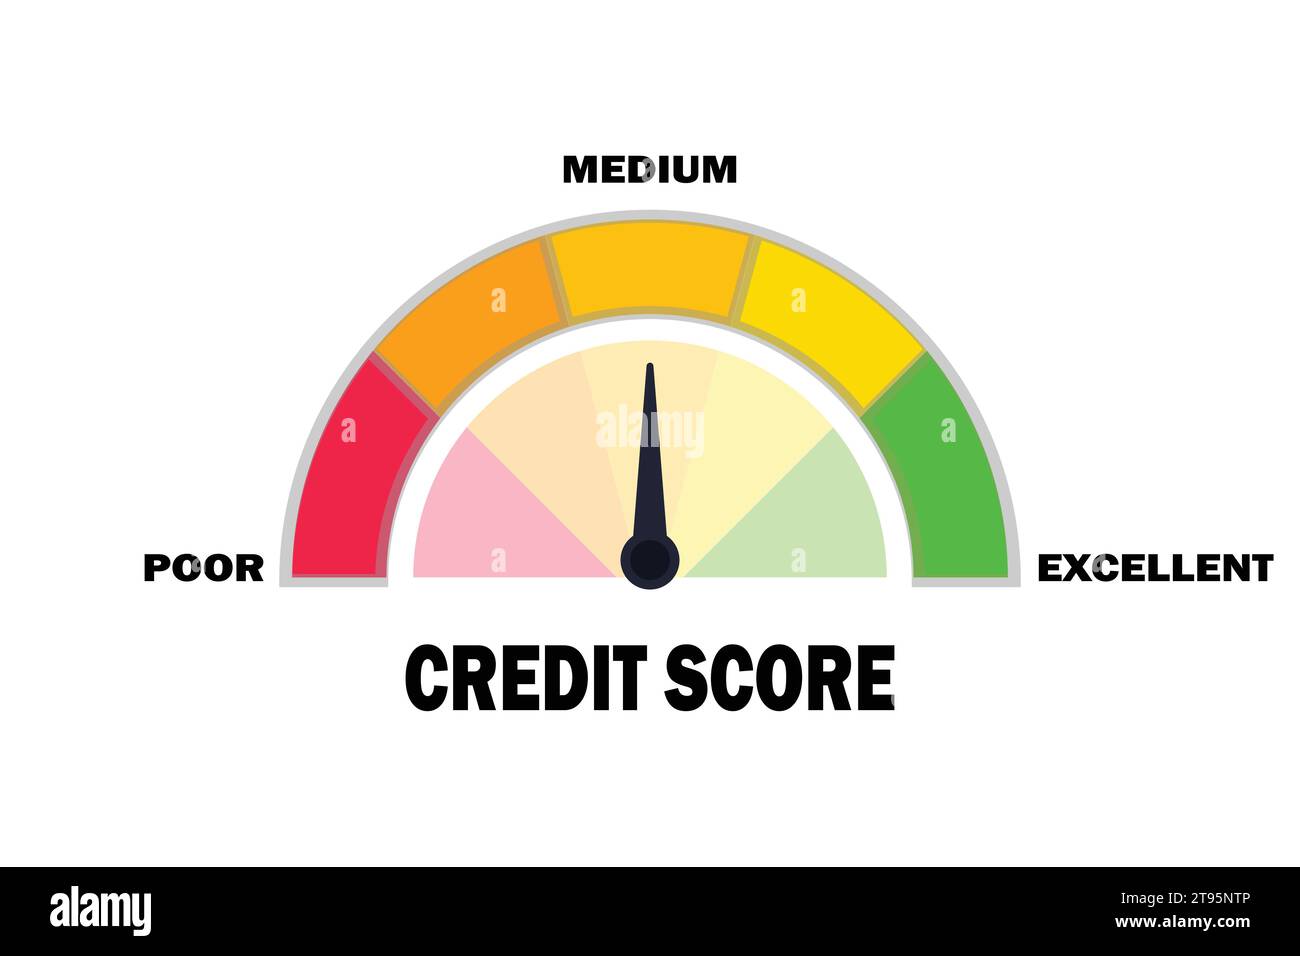 https://c8.alamy.com/comp/2T95NTP/credit-score-meter-with-arrow-loan-rating-scale-with-levels-from-poor-to-excellent-financial-capacity-assessment-vector-flat-illustration-2T95NTP.jpg